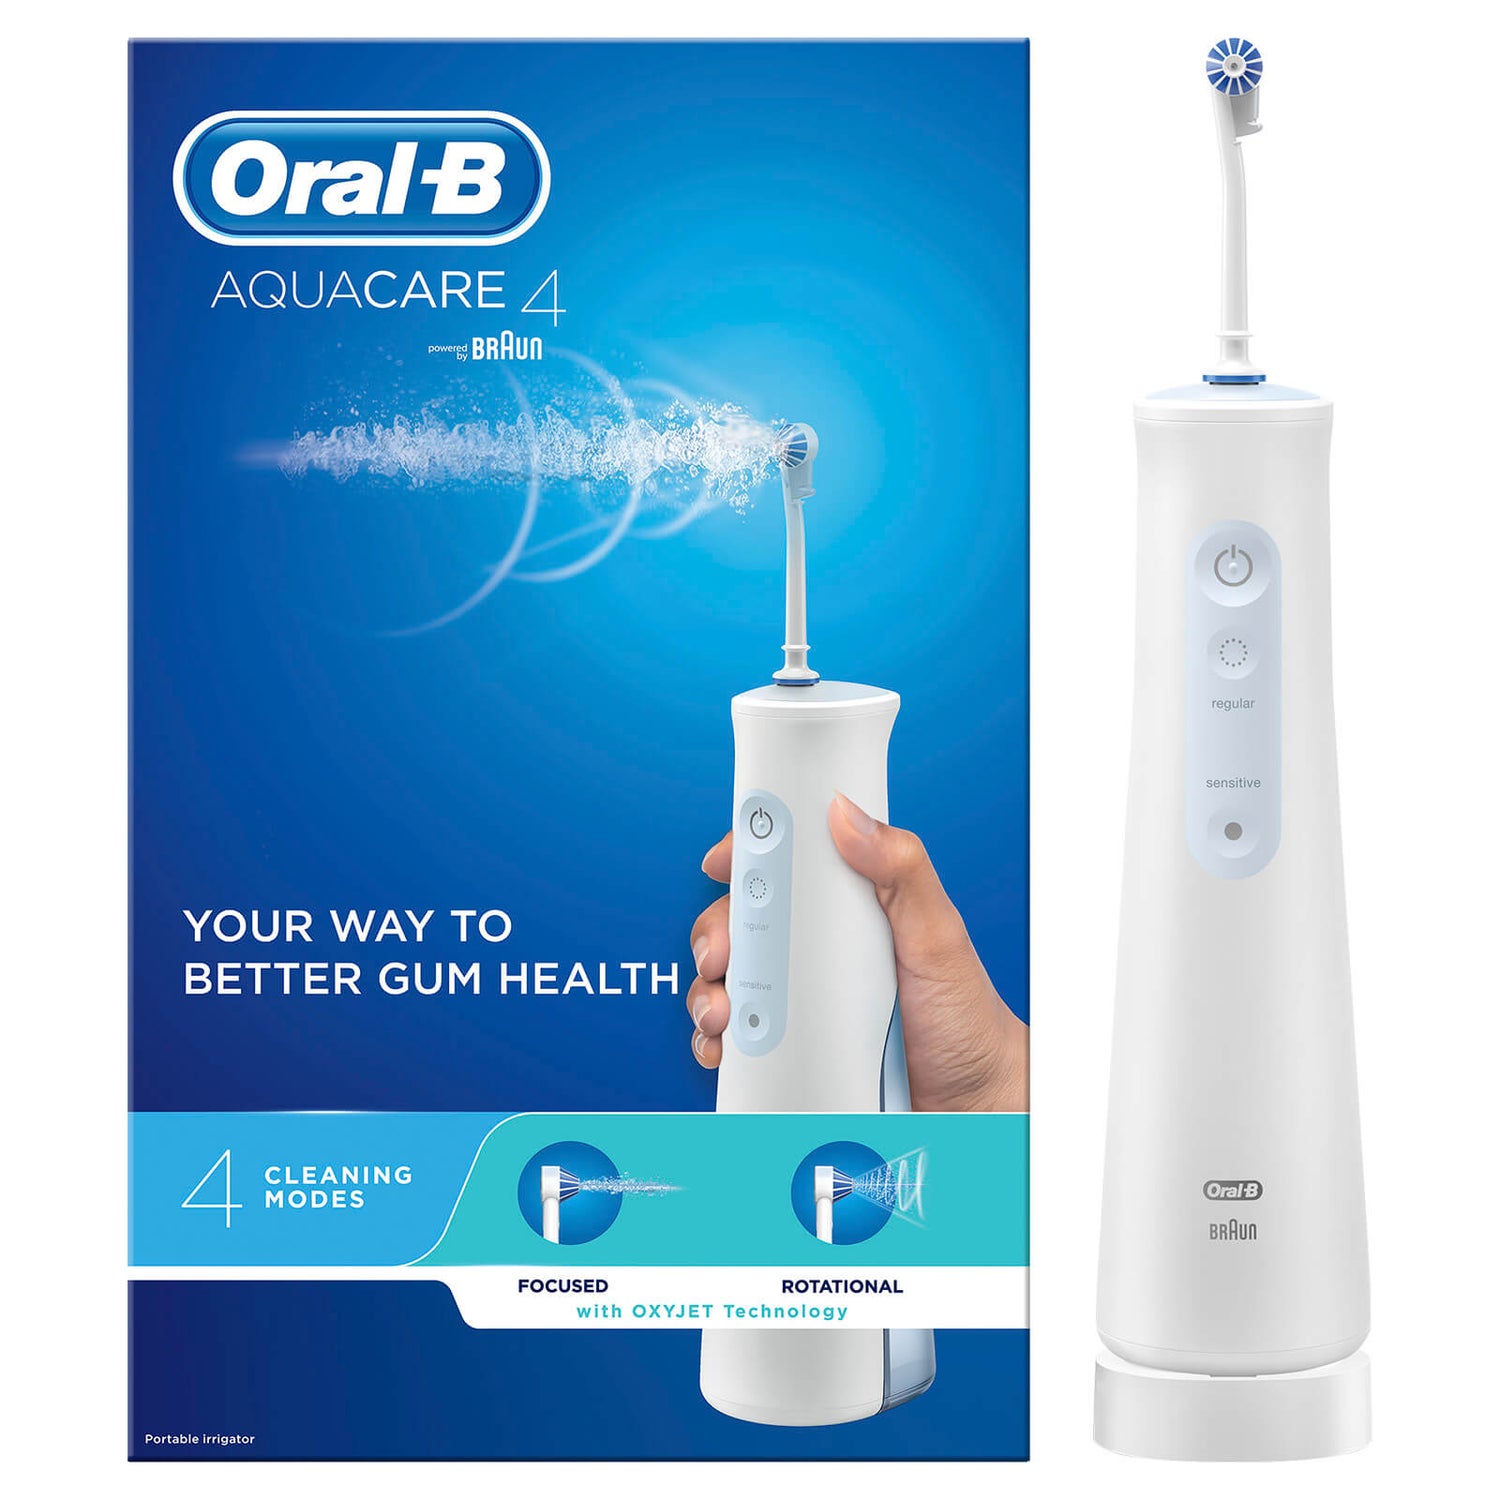 Aquacare Water Flosser Featuring Oxyjet Technology